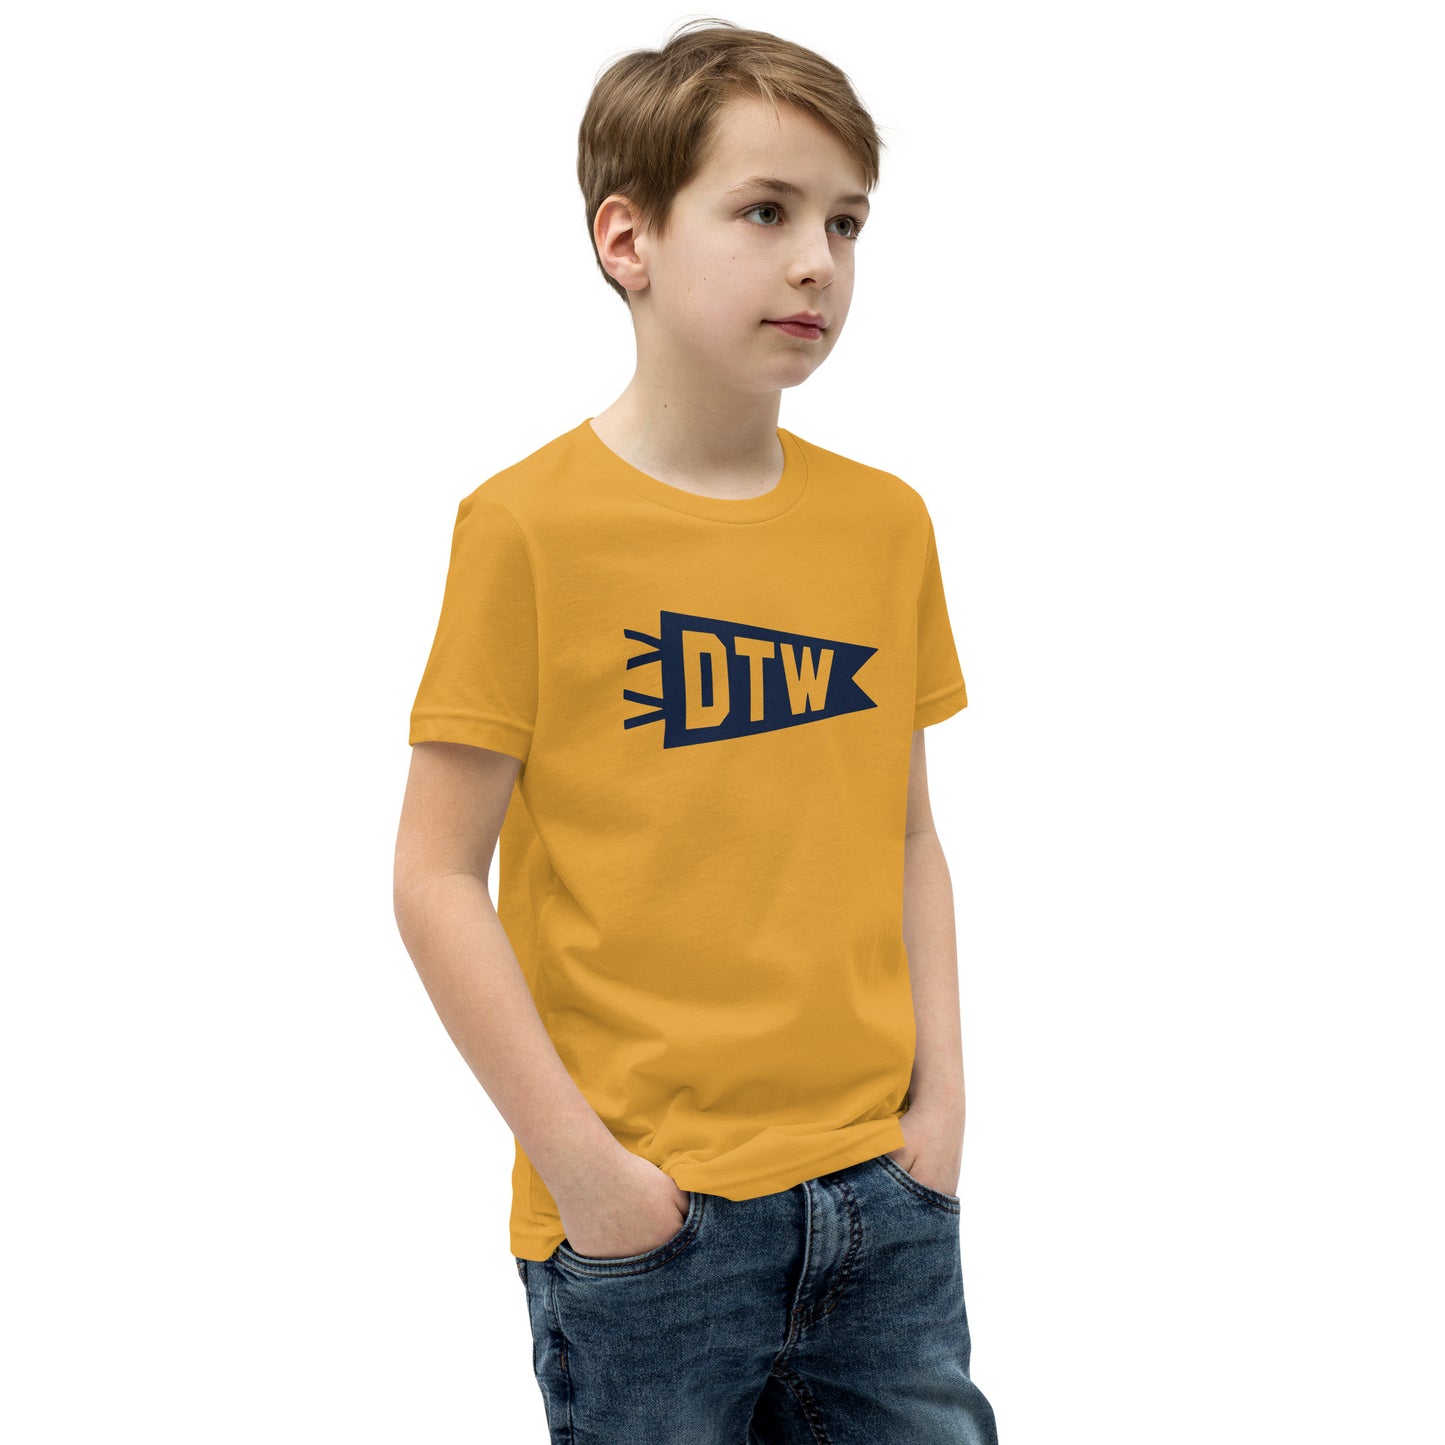 Kid's Airport Code Tee - Navy Blue Graphic • DTW Detroit • YHM Designs - Image 07